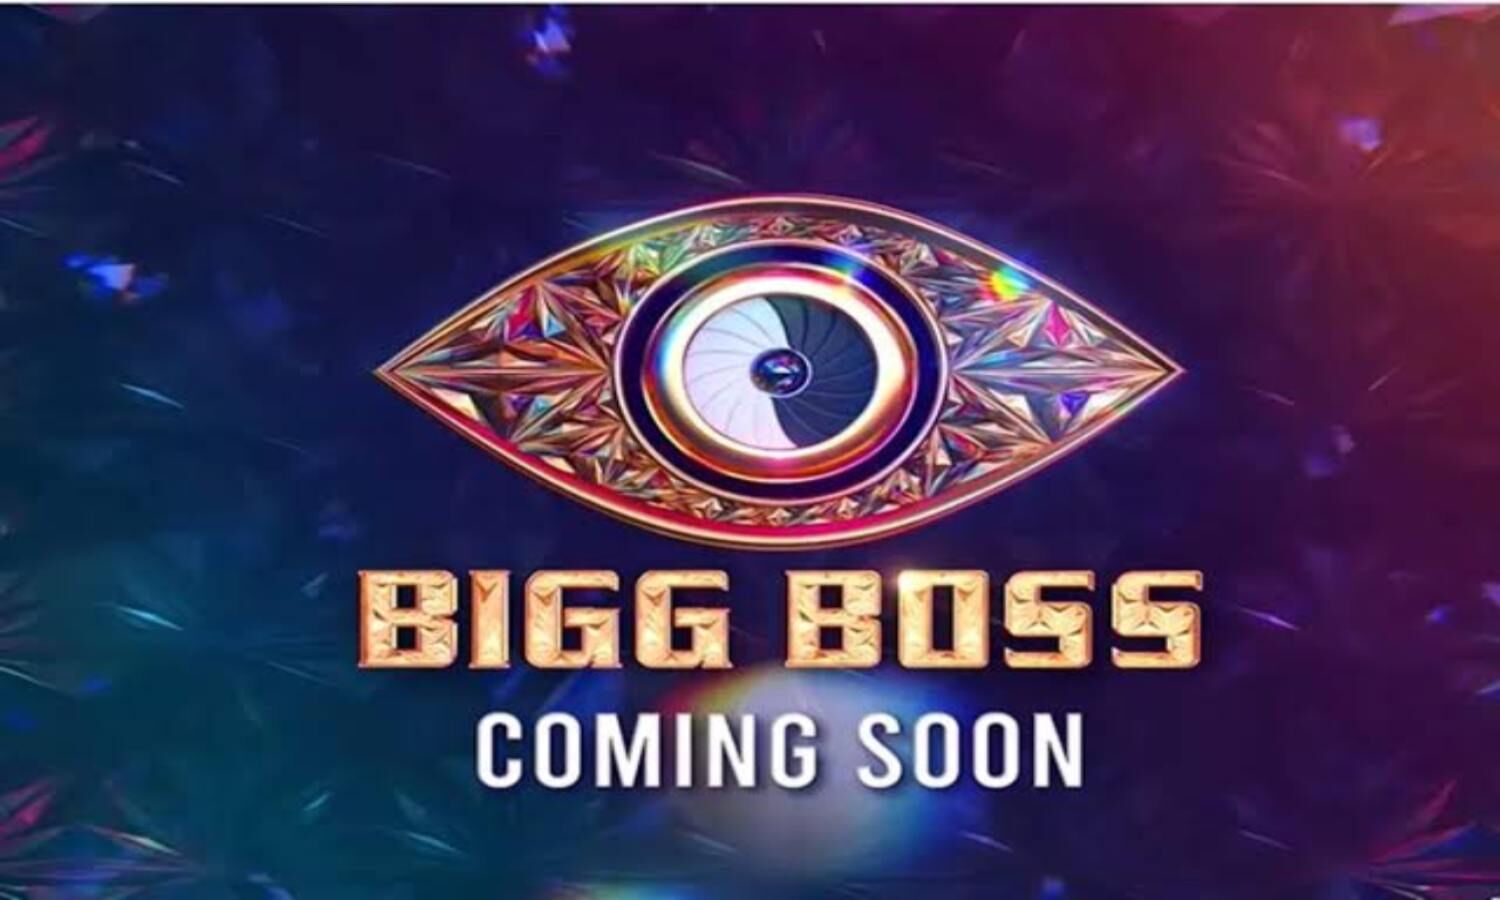 Bigg Boss16 Promo Out: Big Boss’s promo out, see all the contestants of the last 15 years